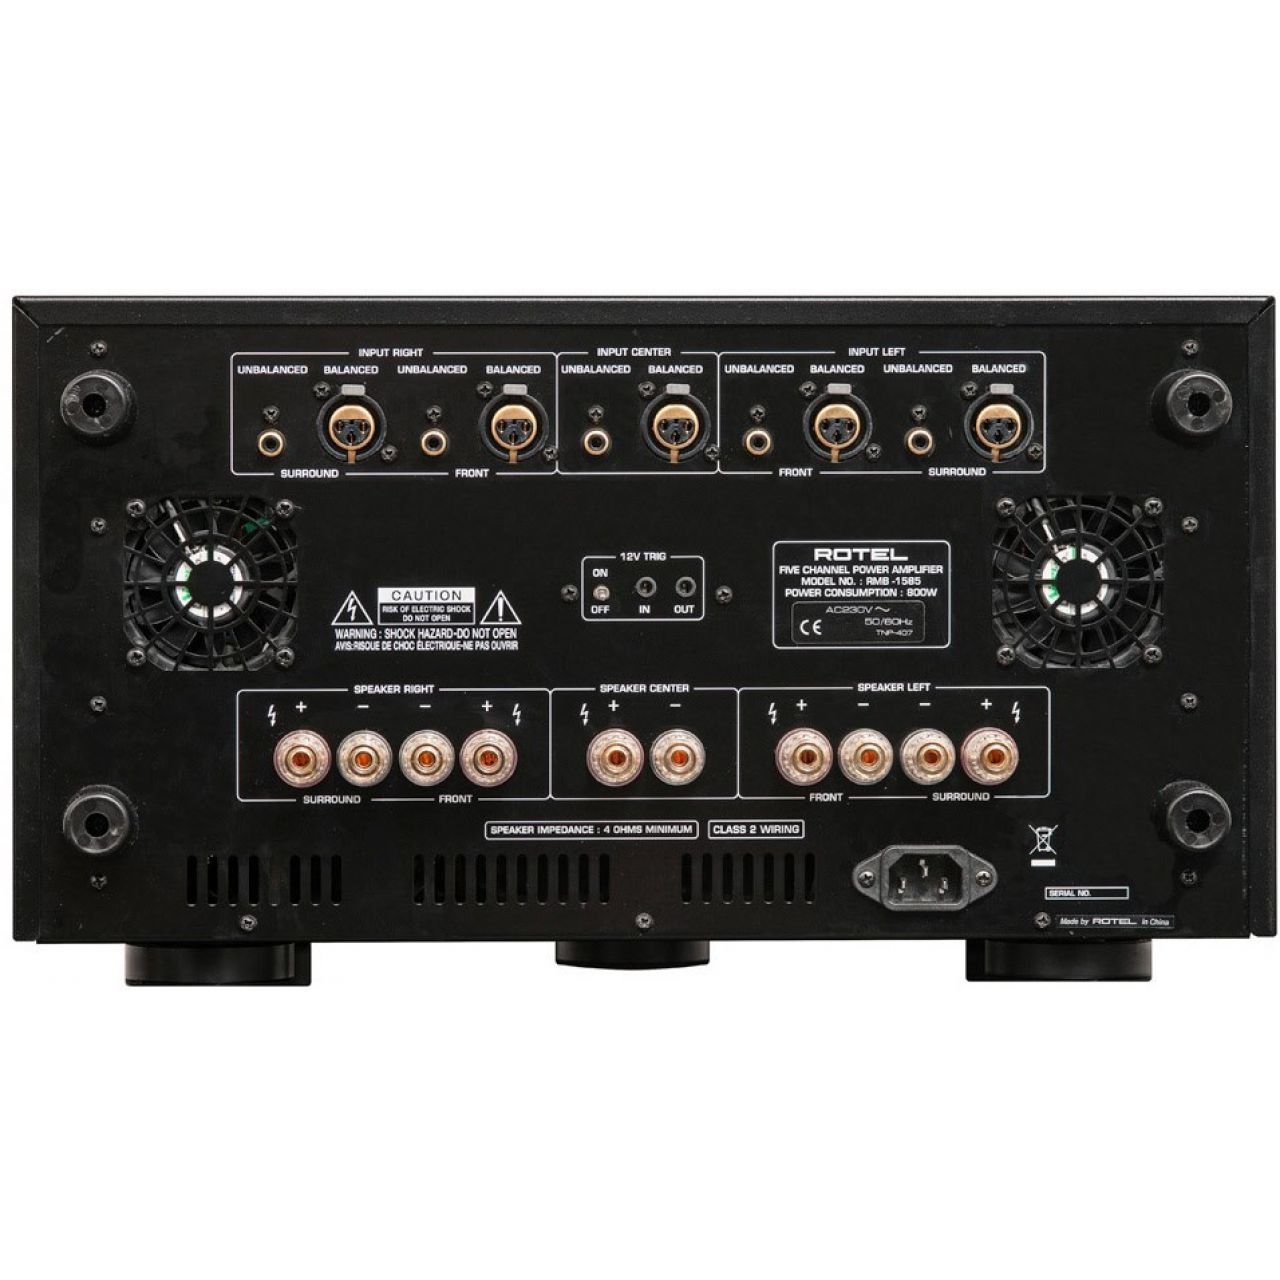 Rotel RMB-1585 Five Channel Amp